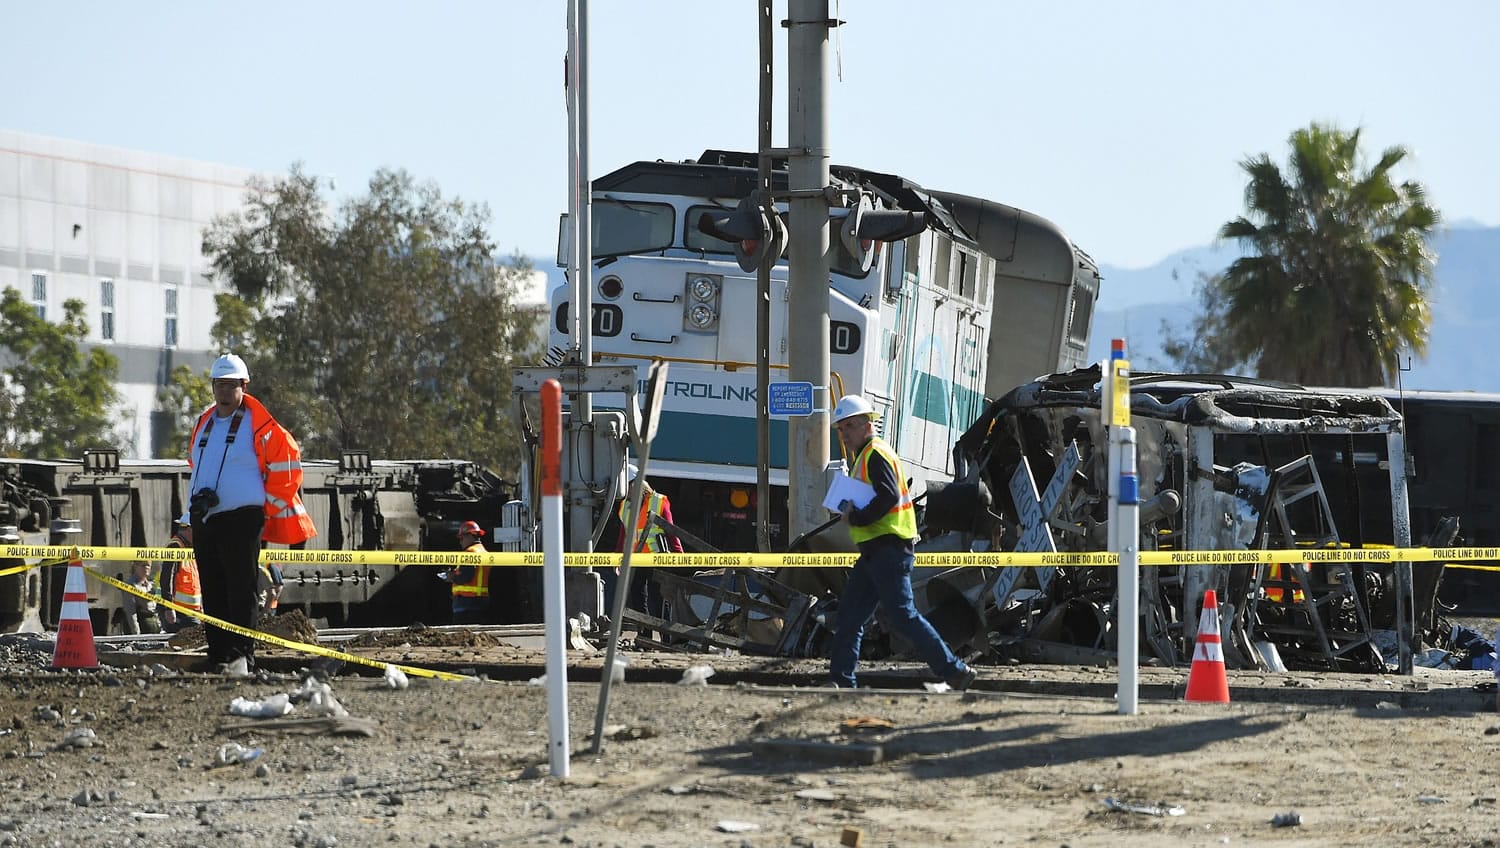 Workers walk near a Metrolink train engine from a train that hit a truck and then derailed Tuesday in Oxnard, Calif.